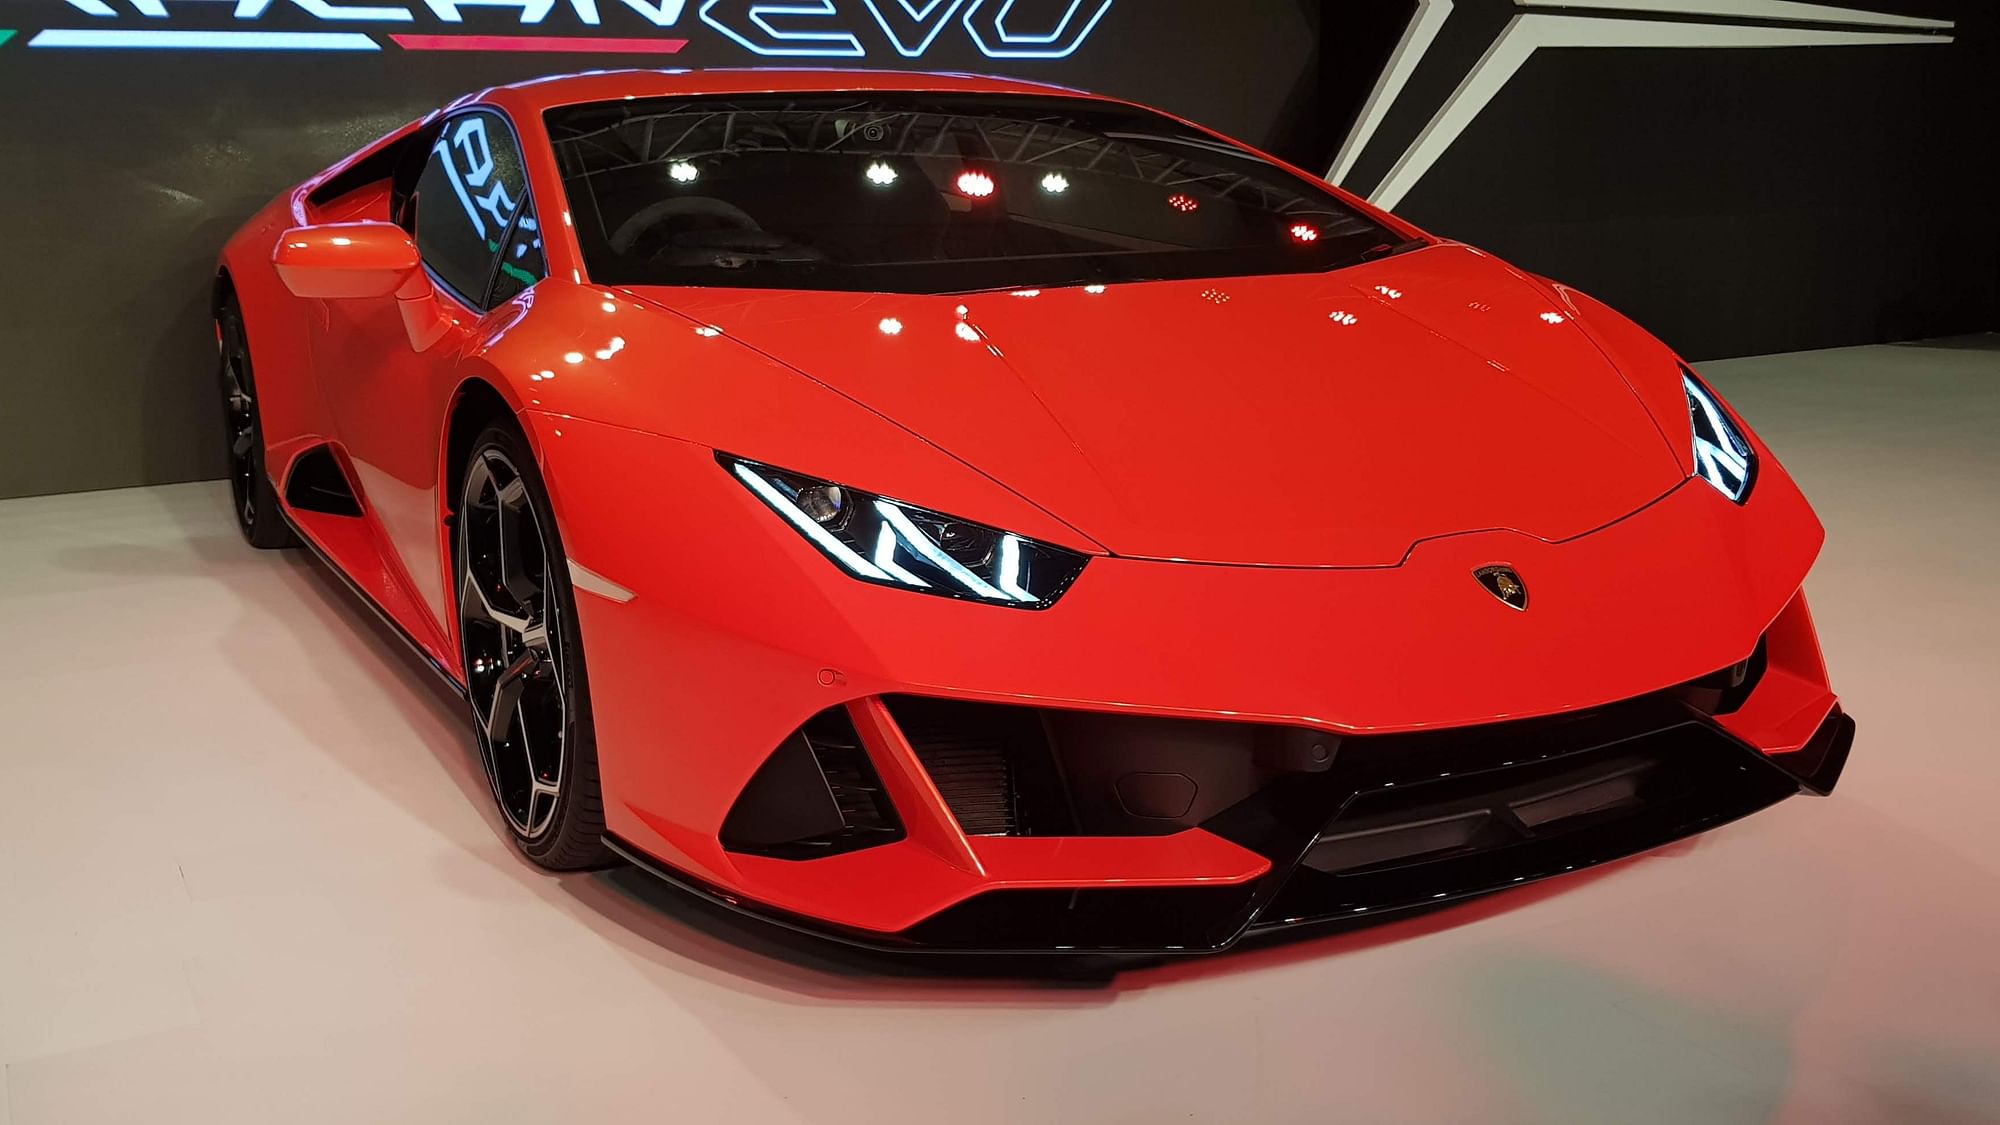 Huracan Evo Launched in India at Rs 3.73 Crore